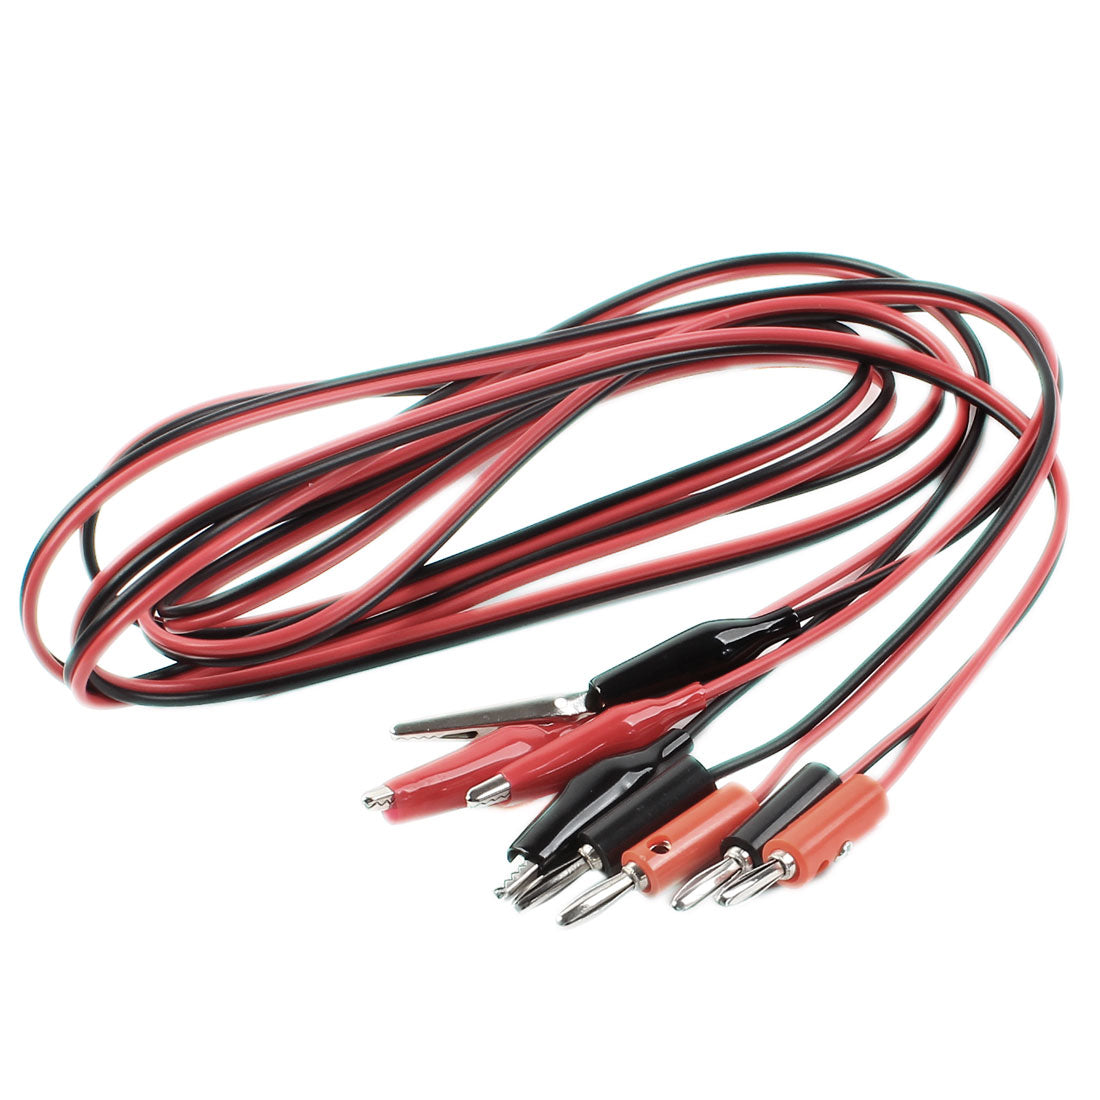 uxcell Uxcell 2pcs 1.5M Black Red Multimeter Part Alligator Clip Test Lead to Banana Line Cable for Test Work